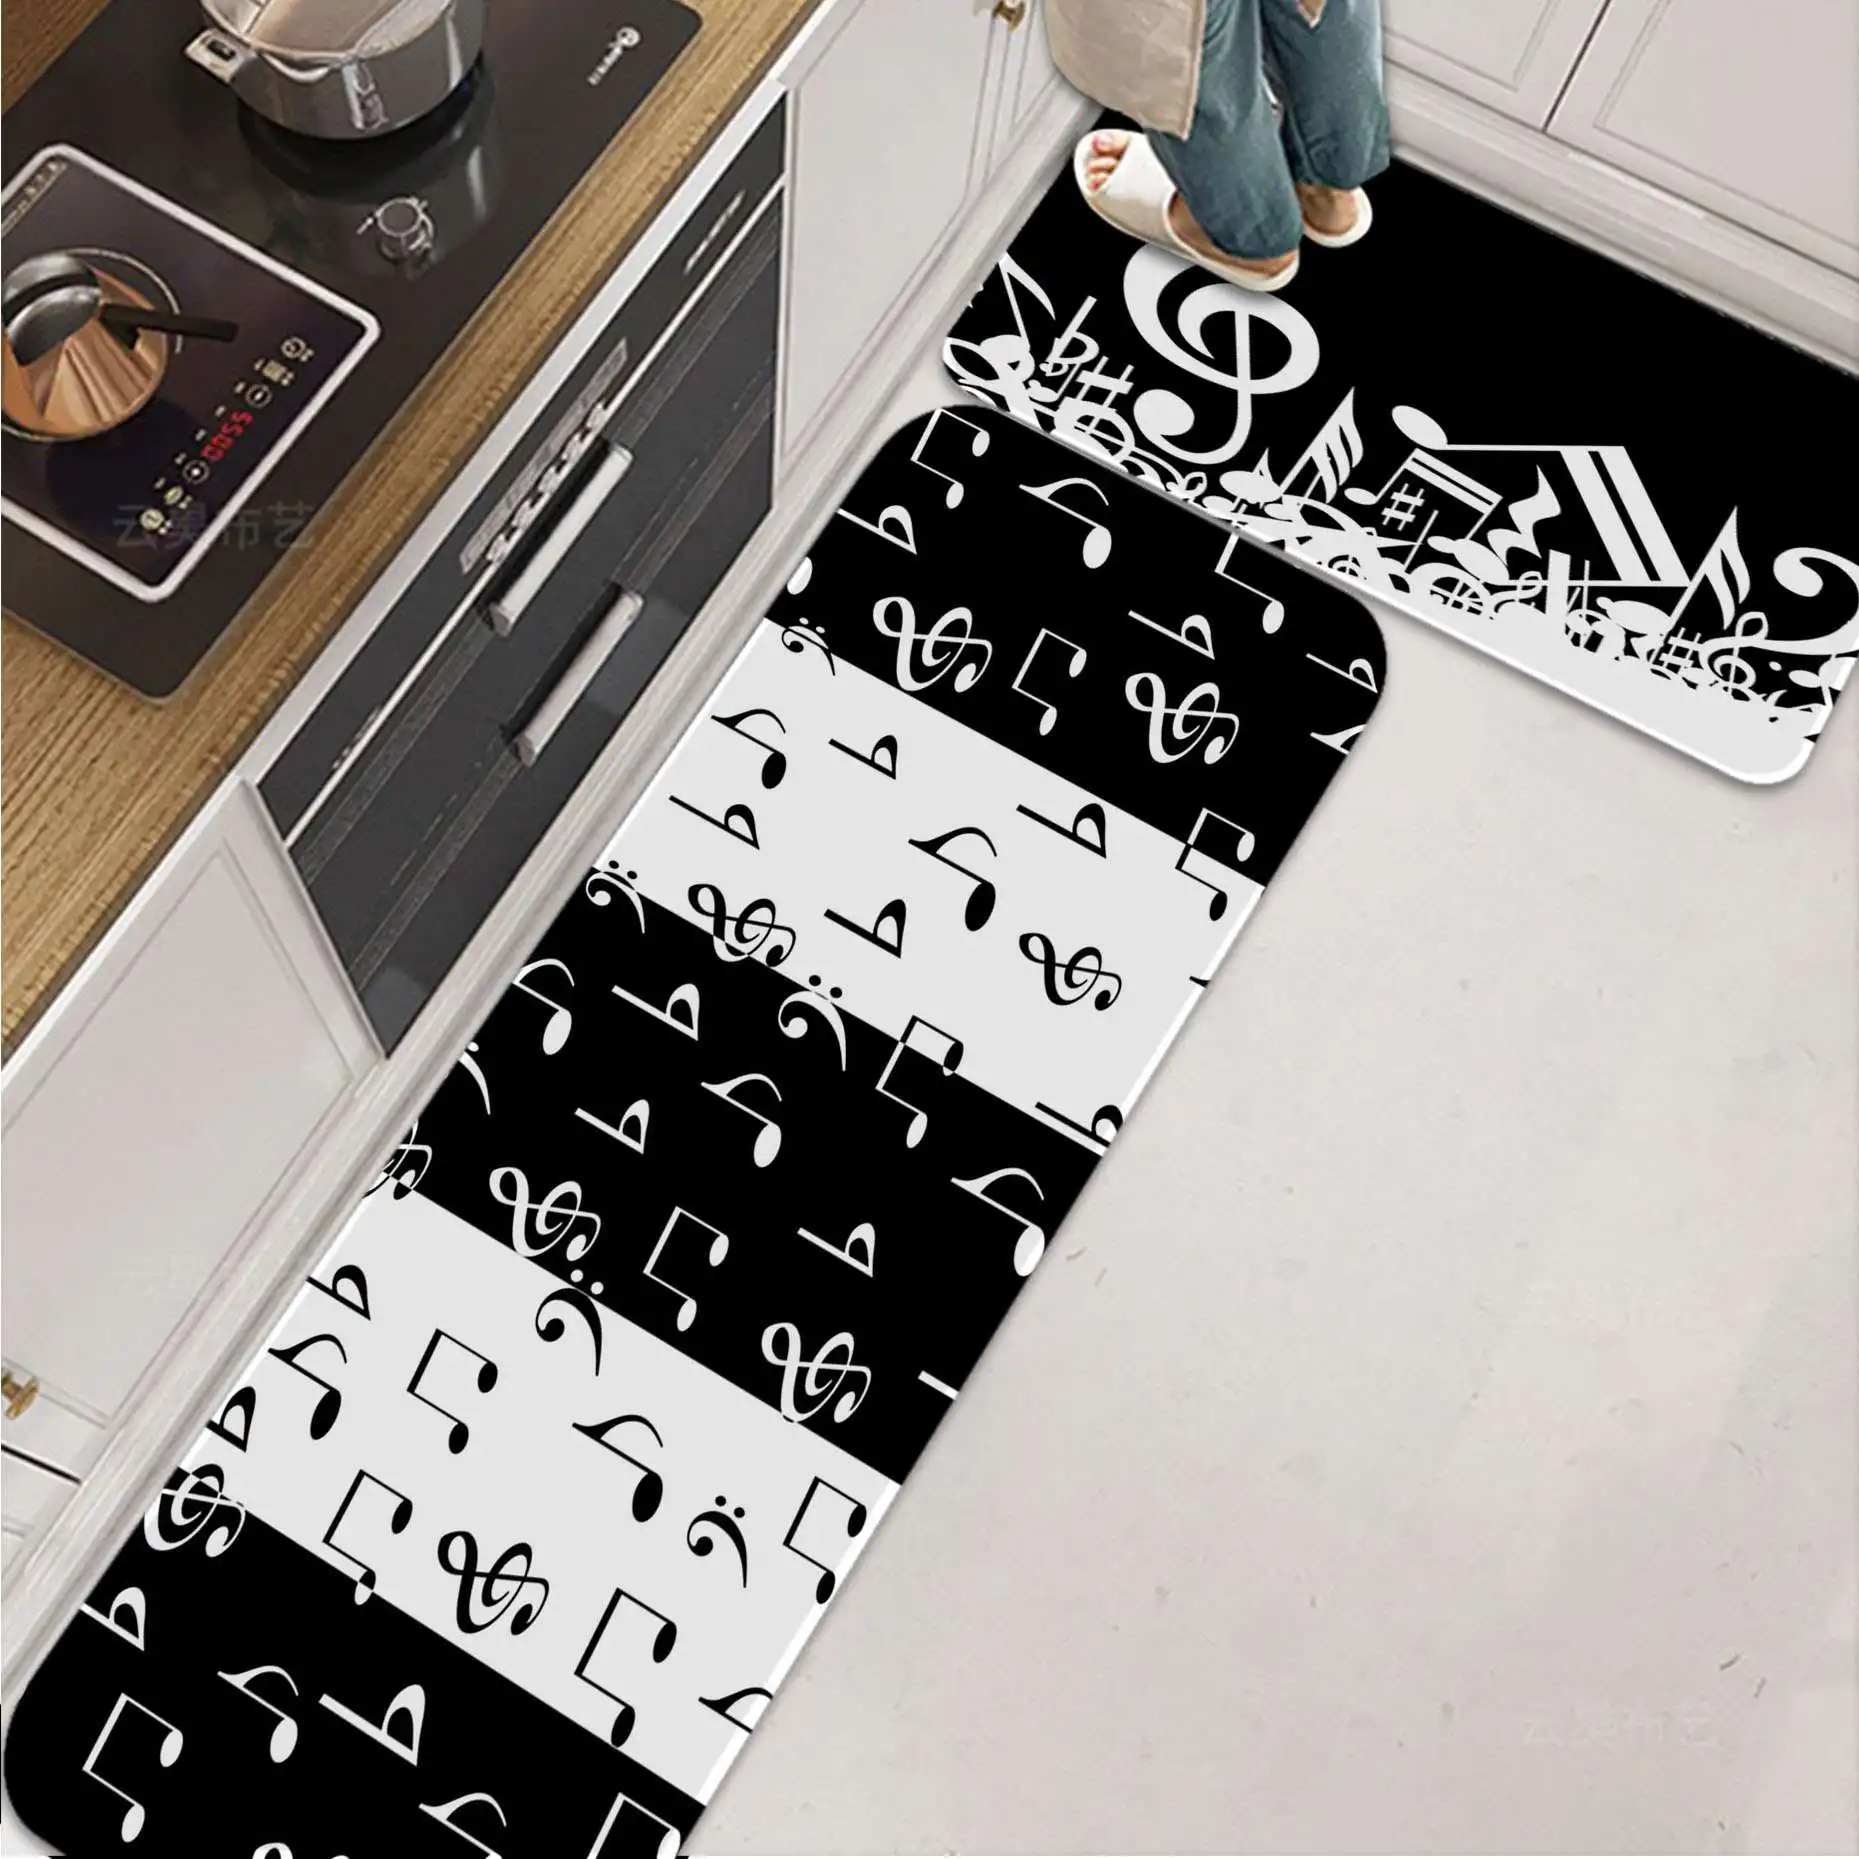 

Music Notes Piano Key Printed Flannel Floor Mat Bathroom Decor Carpet Non-Slip For Living Room Kitchen Welcome Doormat